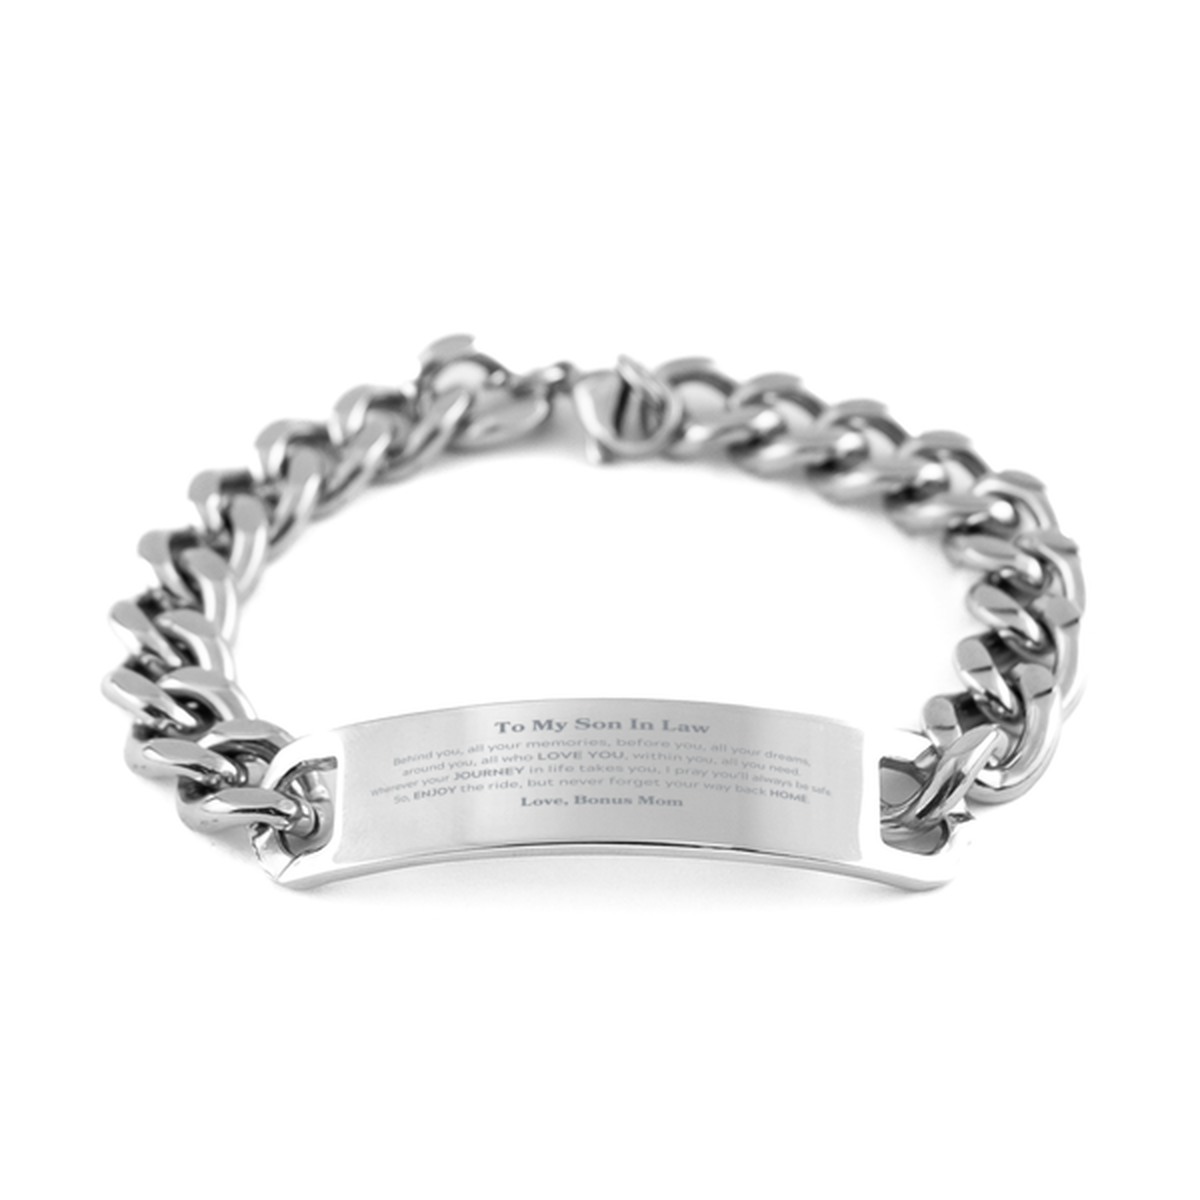 To My Son In Law Graduation Gifts from Bonus Mom, Son In Law Cuban Chain Stainless Steel Bracelet Christmas Birthday Gifts for Son In Law Behind you, all your memories, before you, all your dreams. Love, Bonus Mom